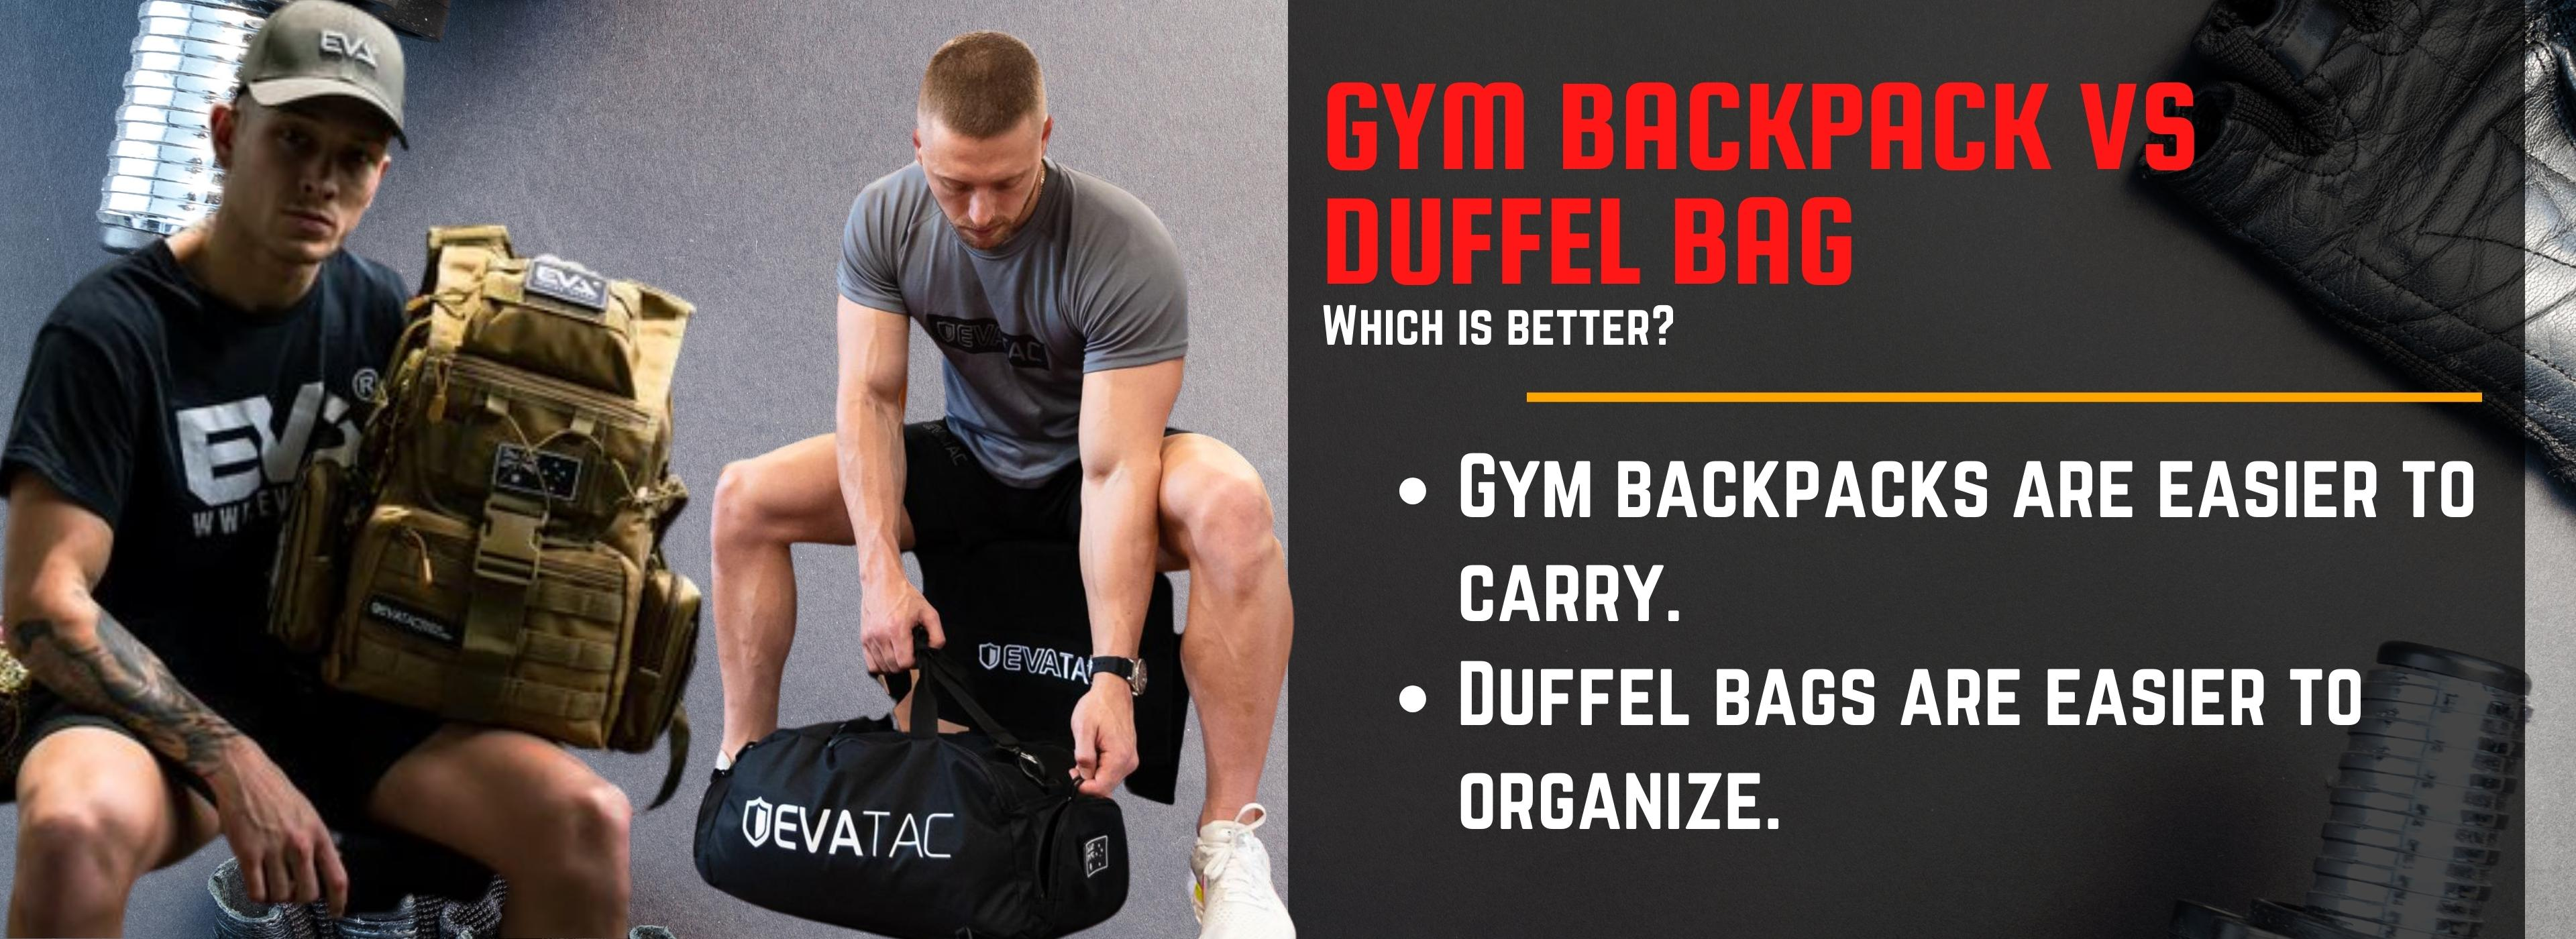 best gym bag, workout gear, dirty clothes, gym essentials, workout clothes, gym towel, shoe compartment, best gym bags, duffle bag, workout bag, shoulder straps, weekend getaway bag, laptop compartment, pack a gym workout backpack 